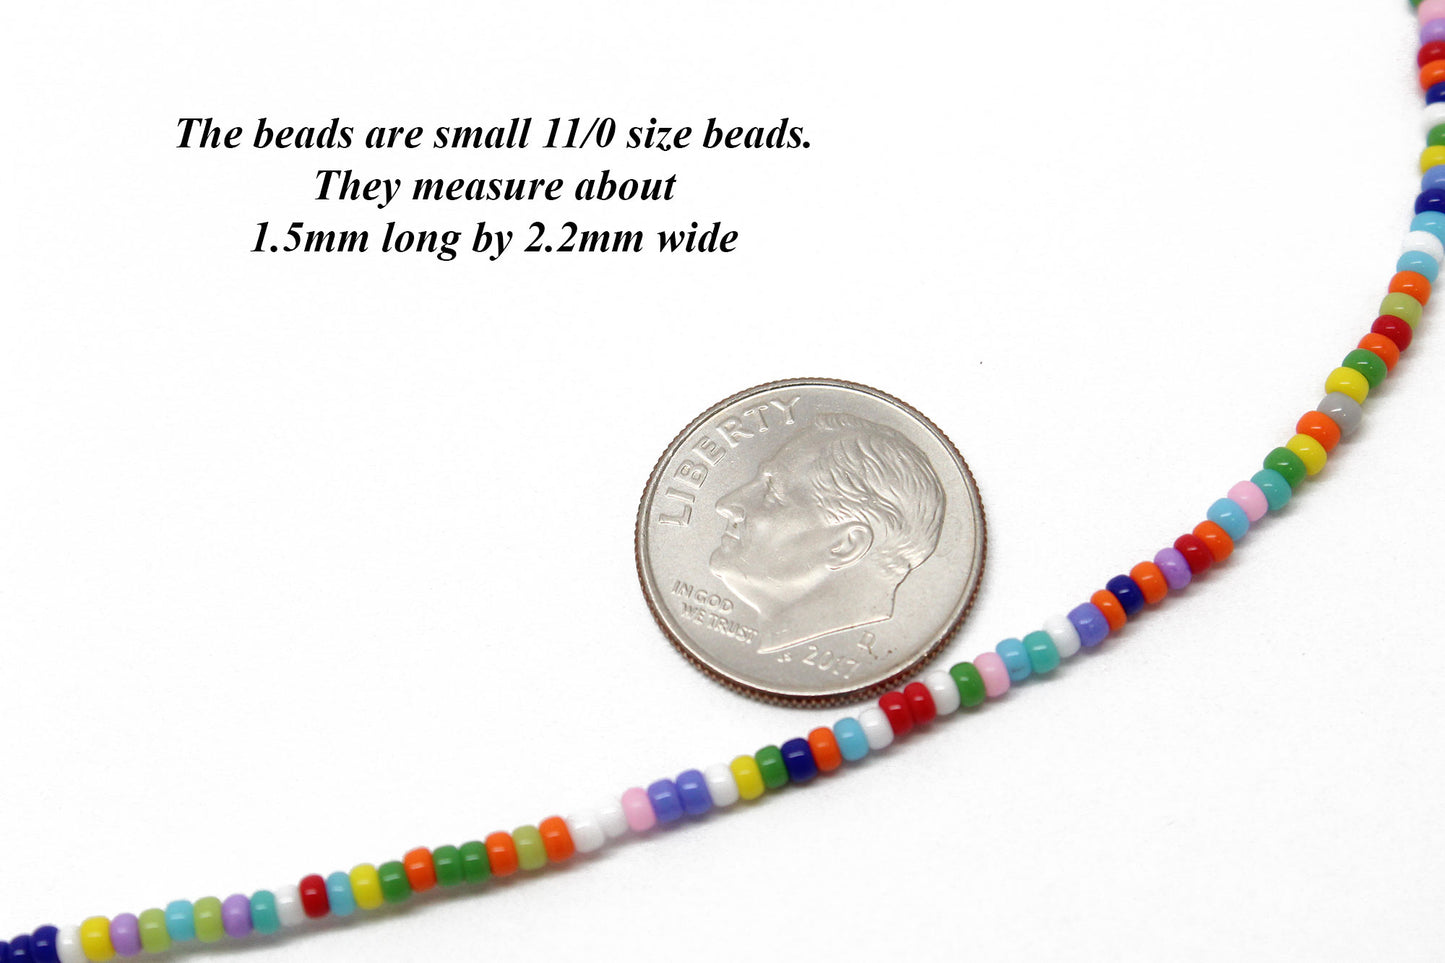 Load image into Gallery viewer, Tiny Multi Color Rainbow Bead Choker, Adjustable 14-16 Inches
